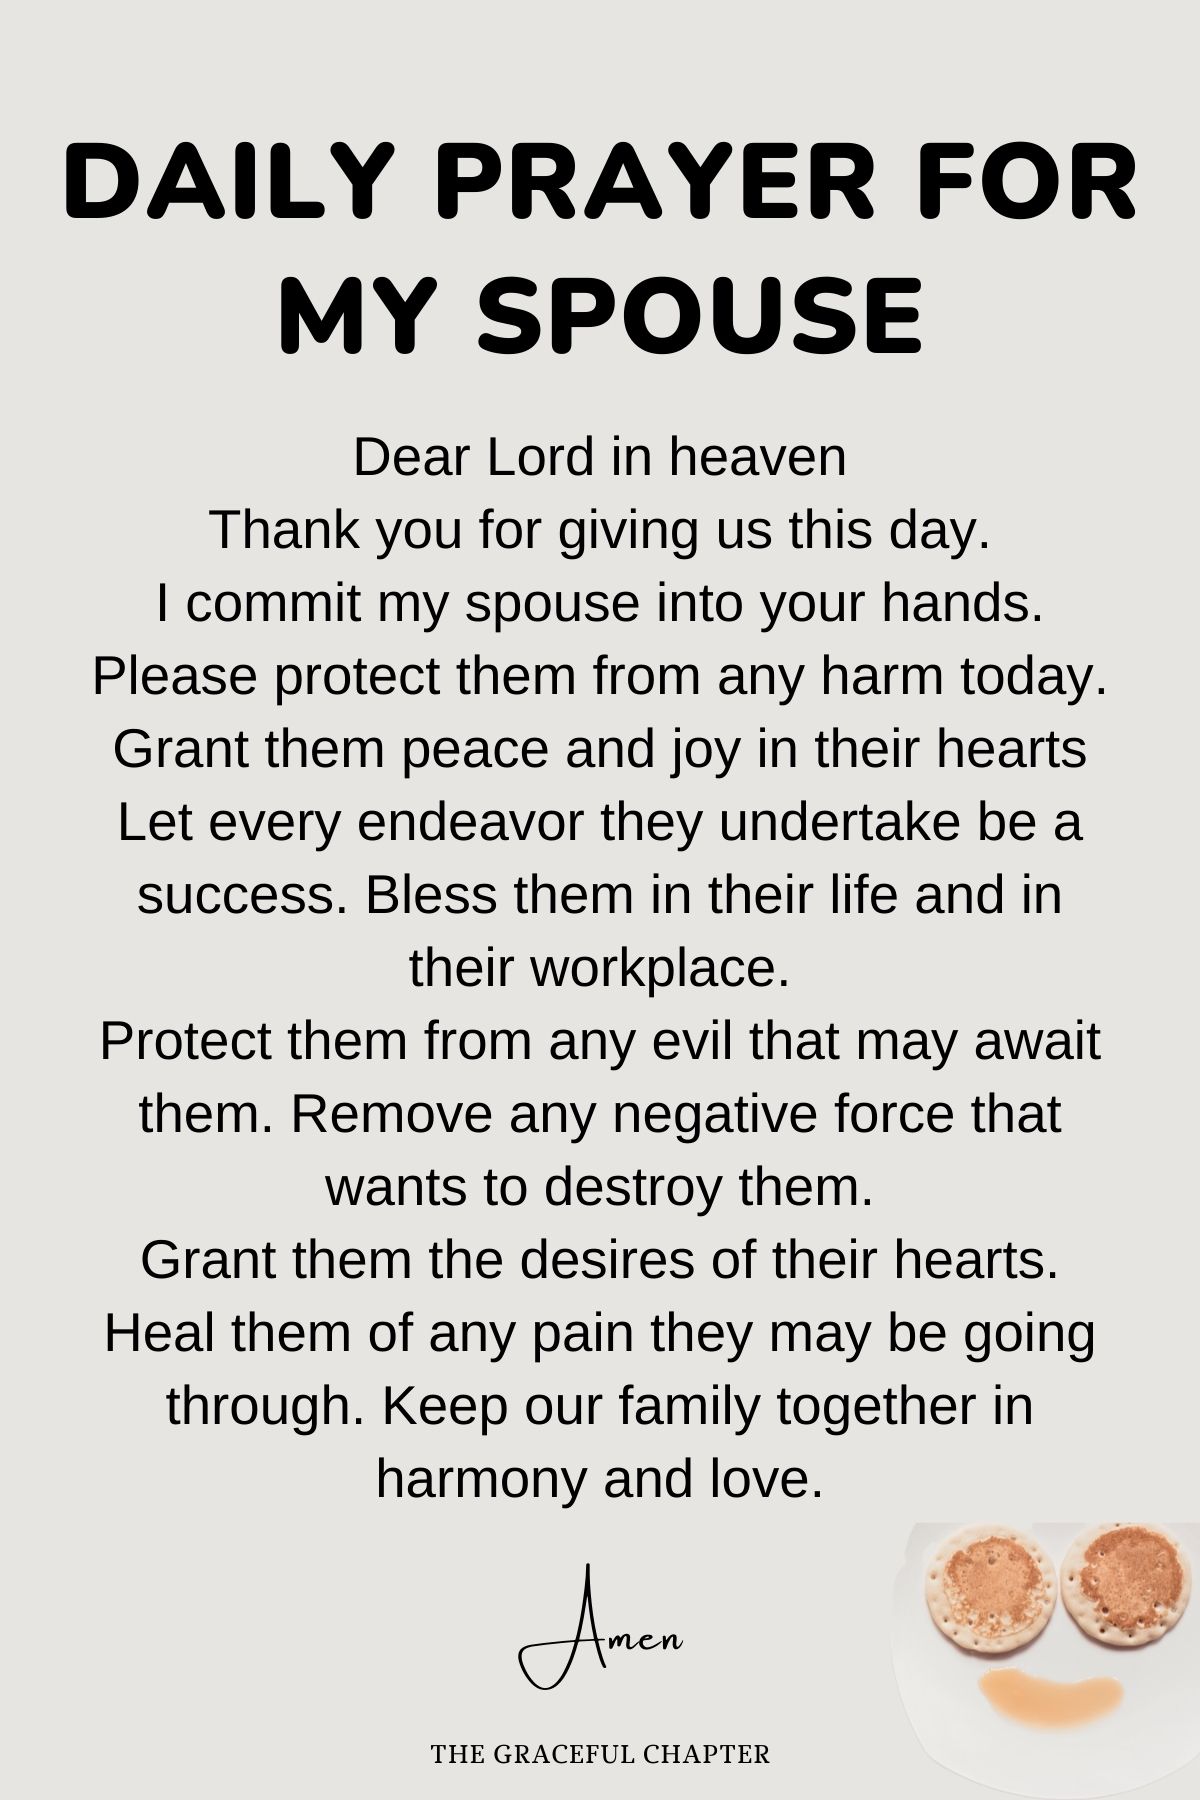 Daily Prayer for my Spouse